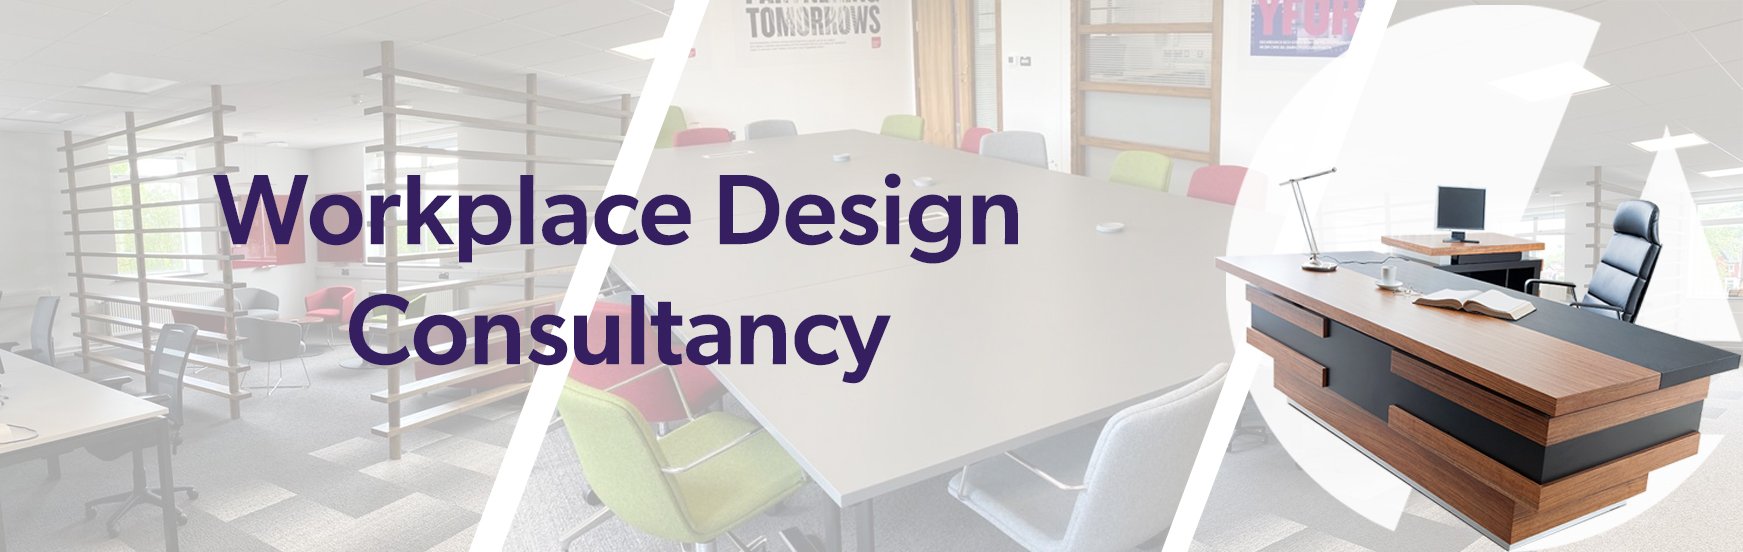 workplace design consultancy